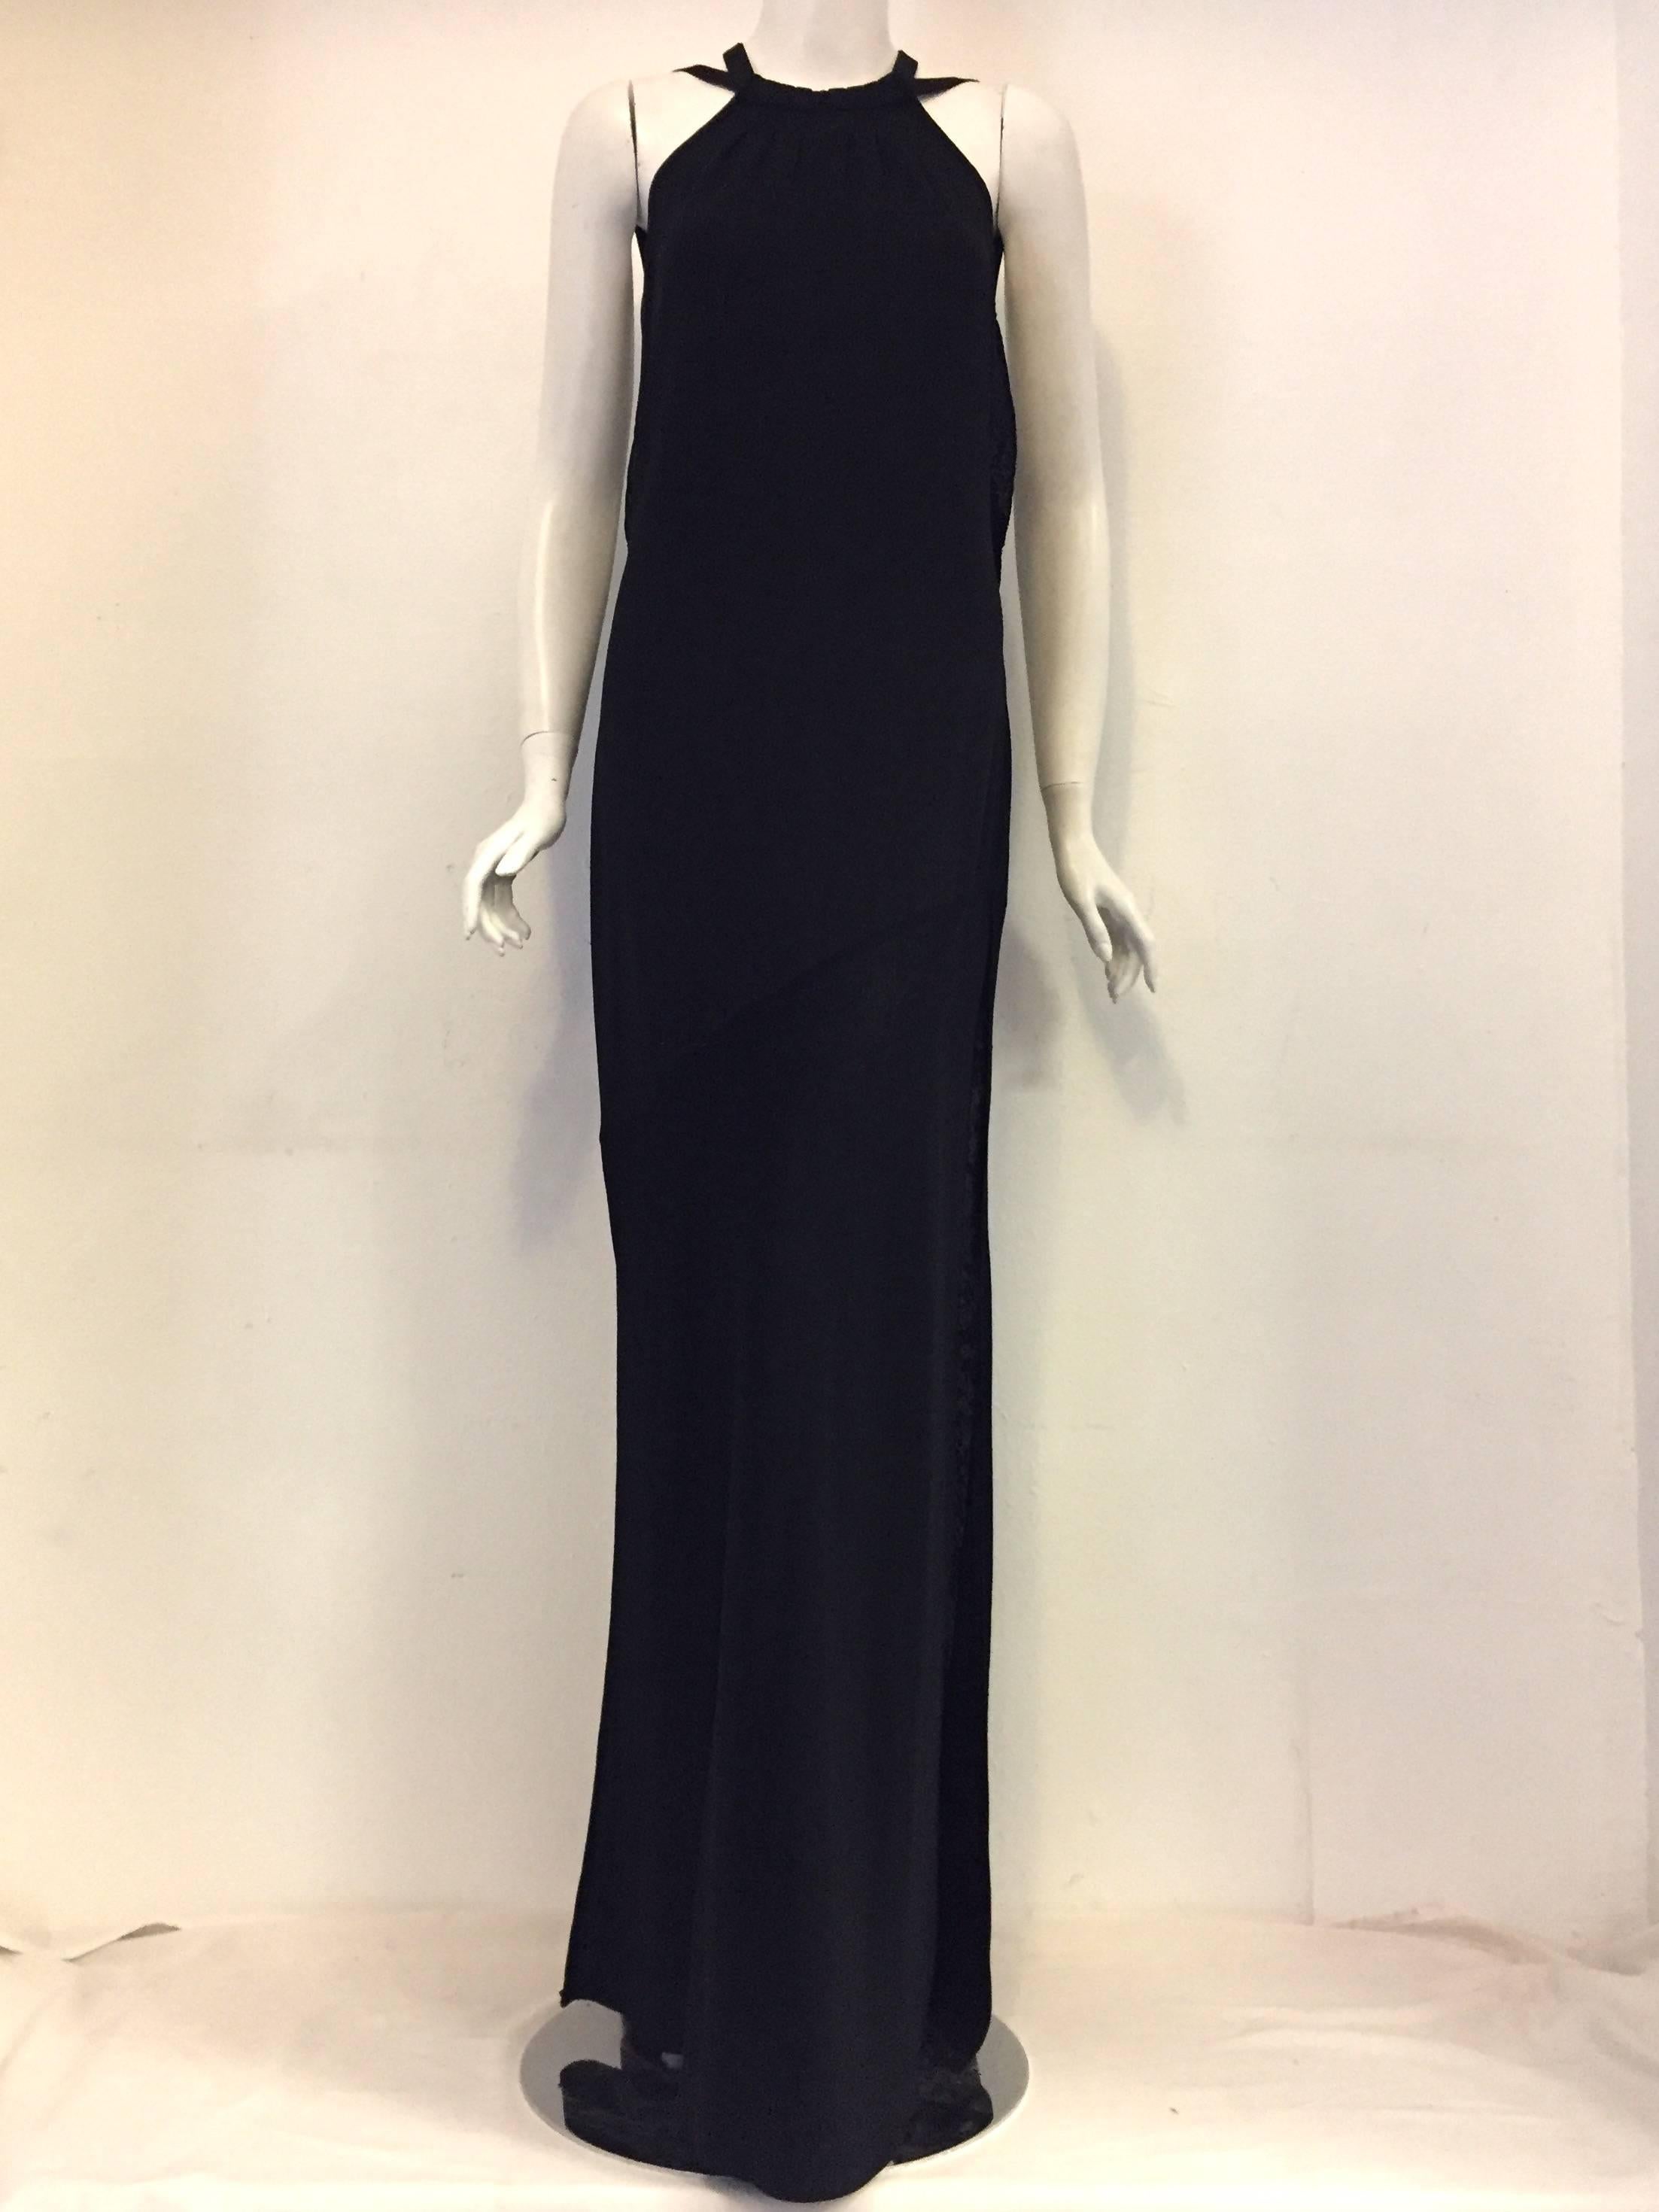 St. John Evening Black Backless Halter Dress w. Black Multifaceted Beads In Excellent Condition For Sale In Palm Beach, FL